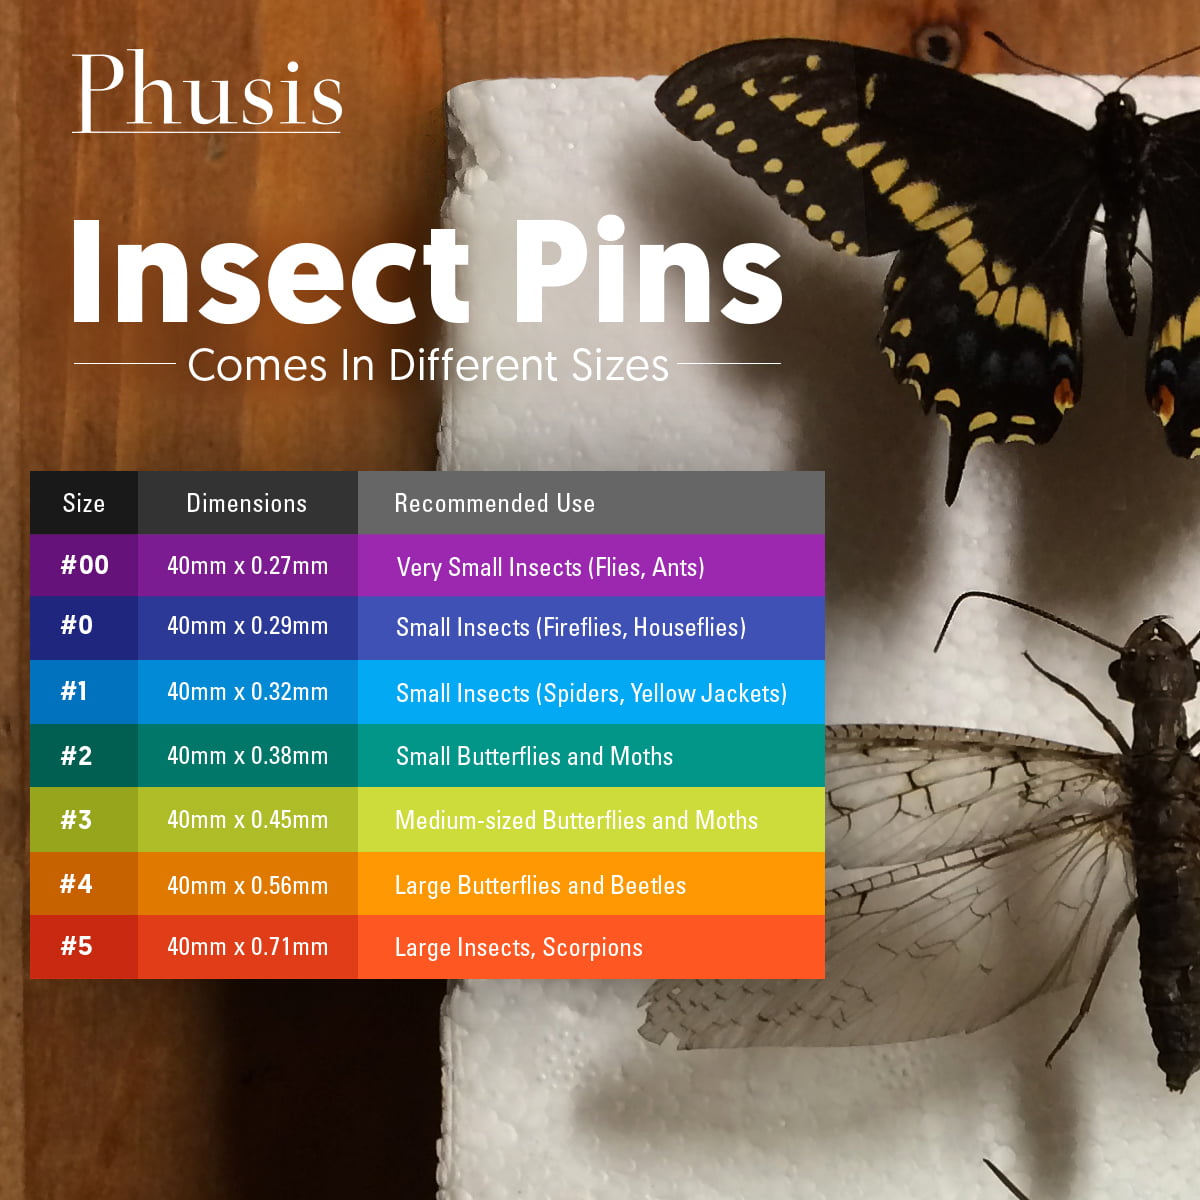 Phusis Stainless Steel Insect Pins for Entomology Includes Sturdy Storage Containers Dissection 300 Pieces| 3 Vials of 100 Pins Butterfly Collections Size #5 